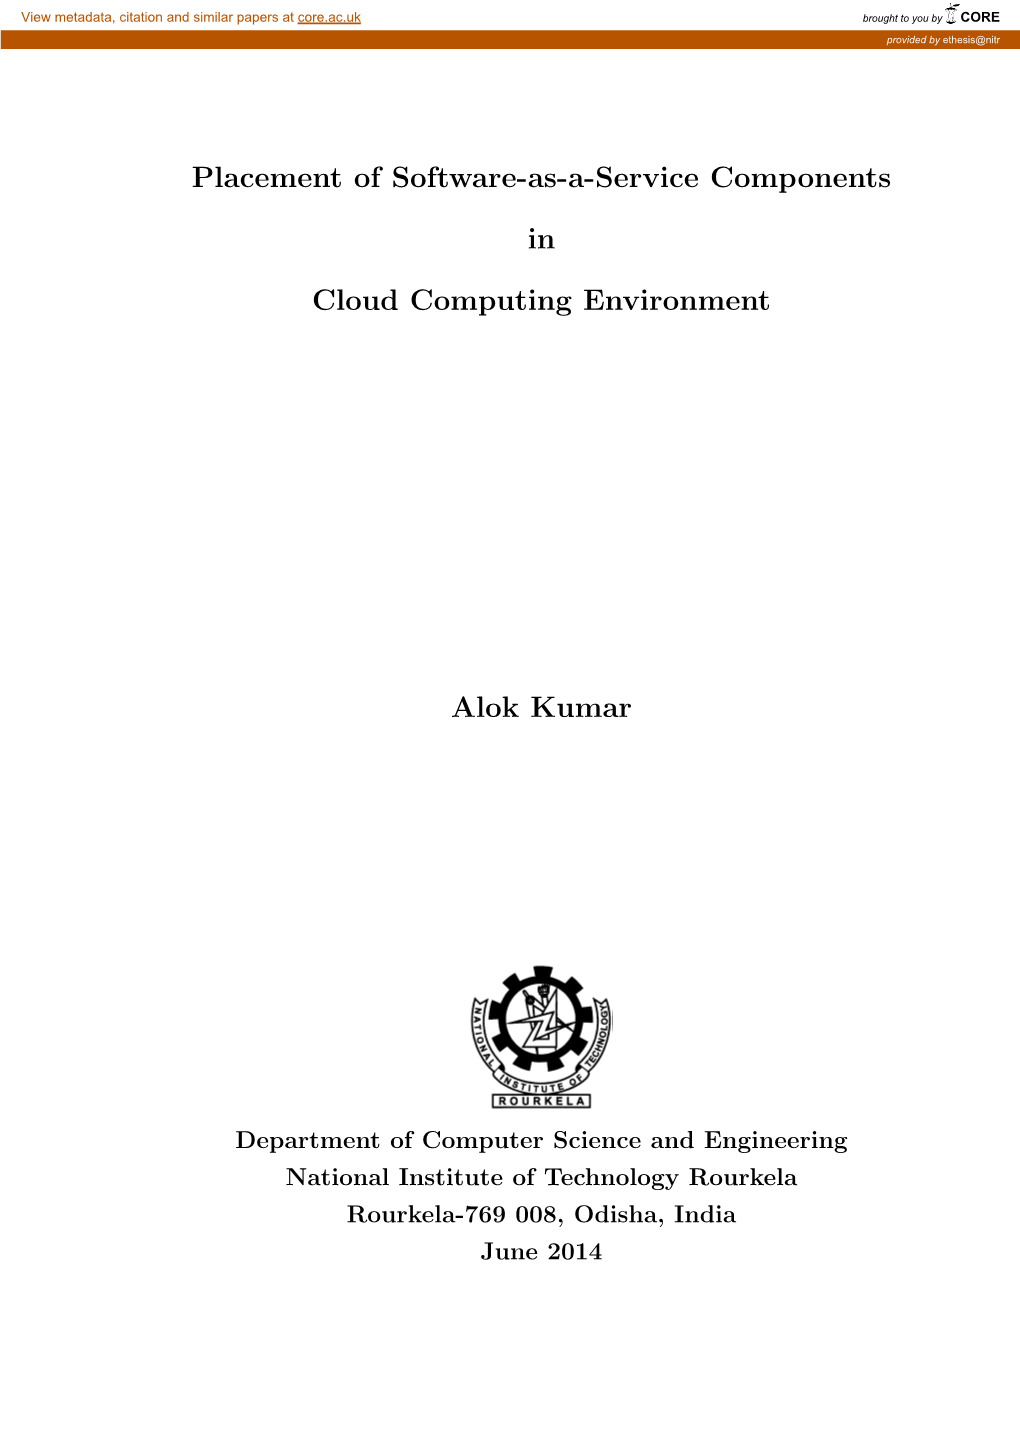 Placement of Software-As-A-Service Components in Cloud Computing Environment